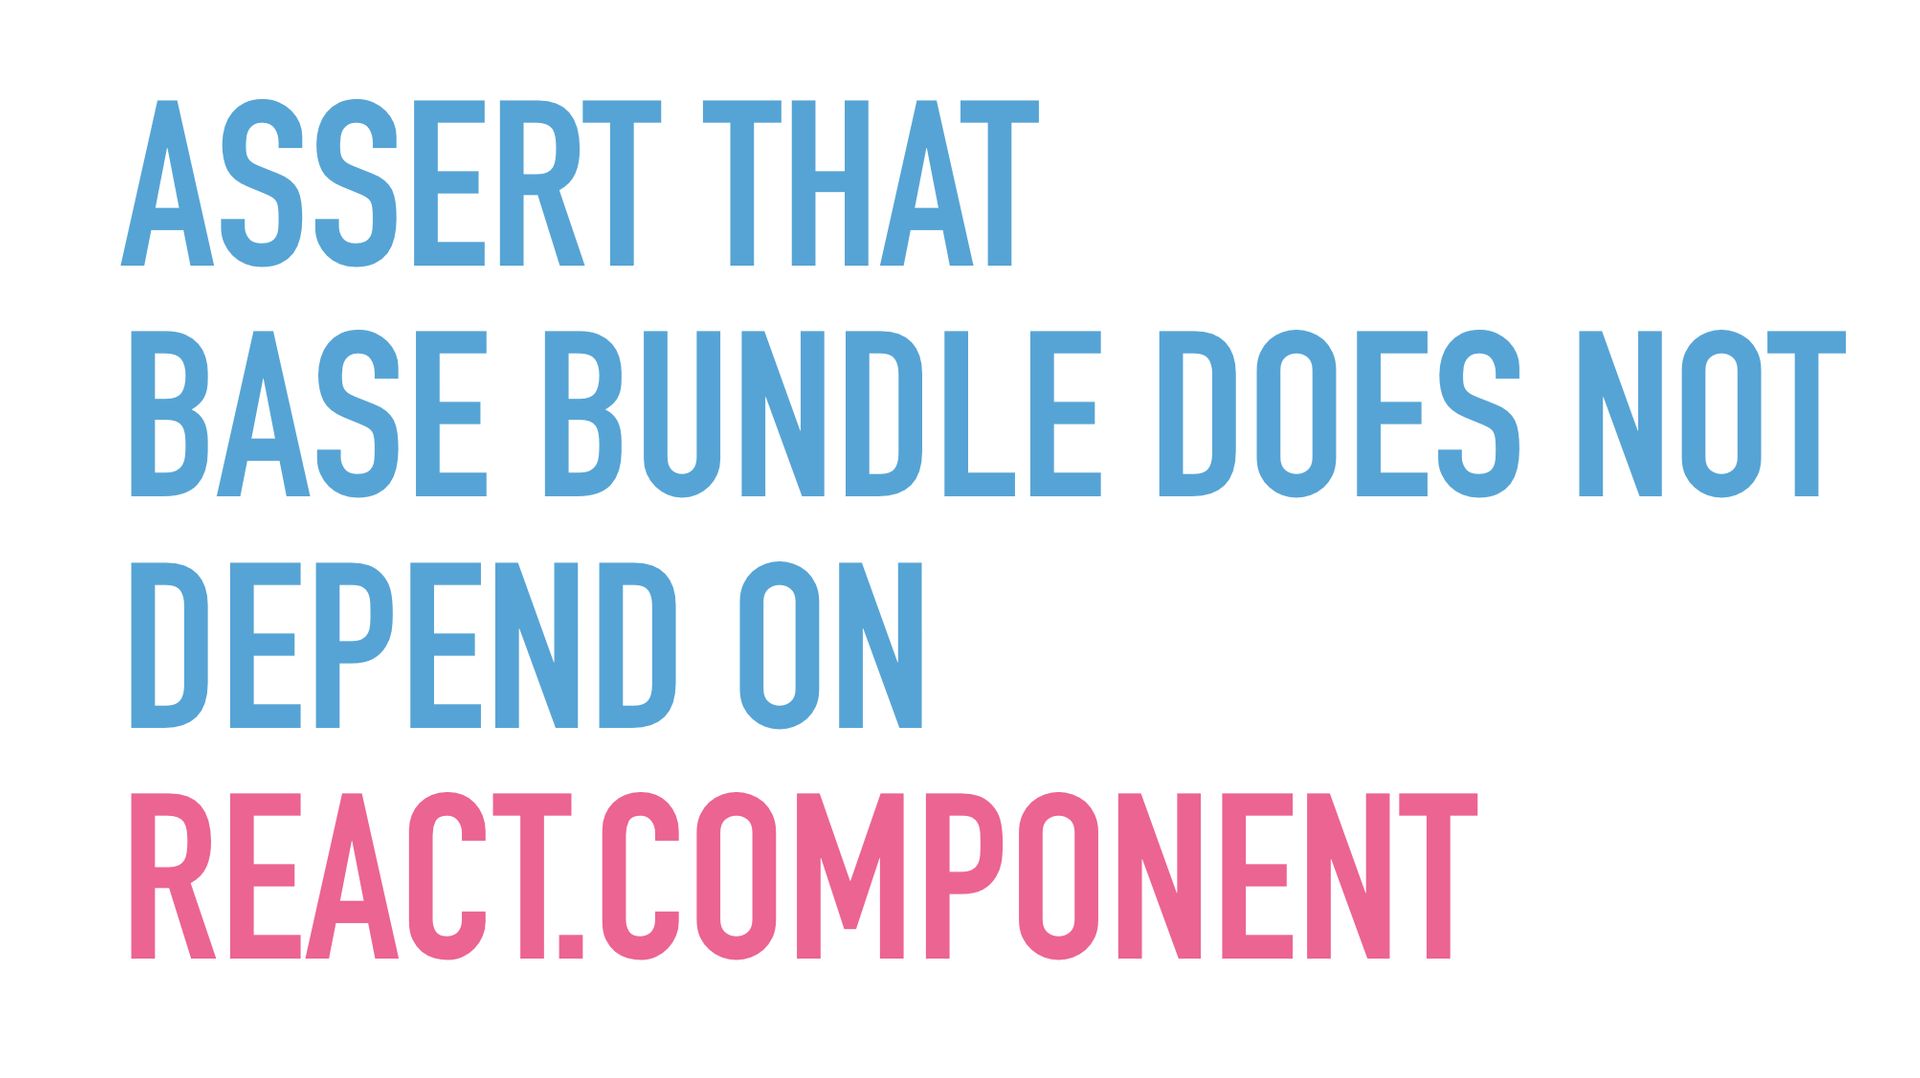 Slide text: Assert that base bundle does not depend on React.Component